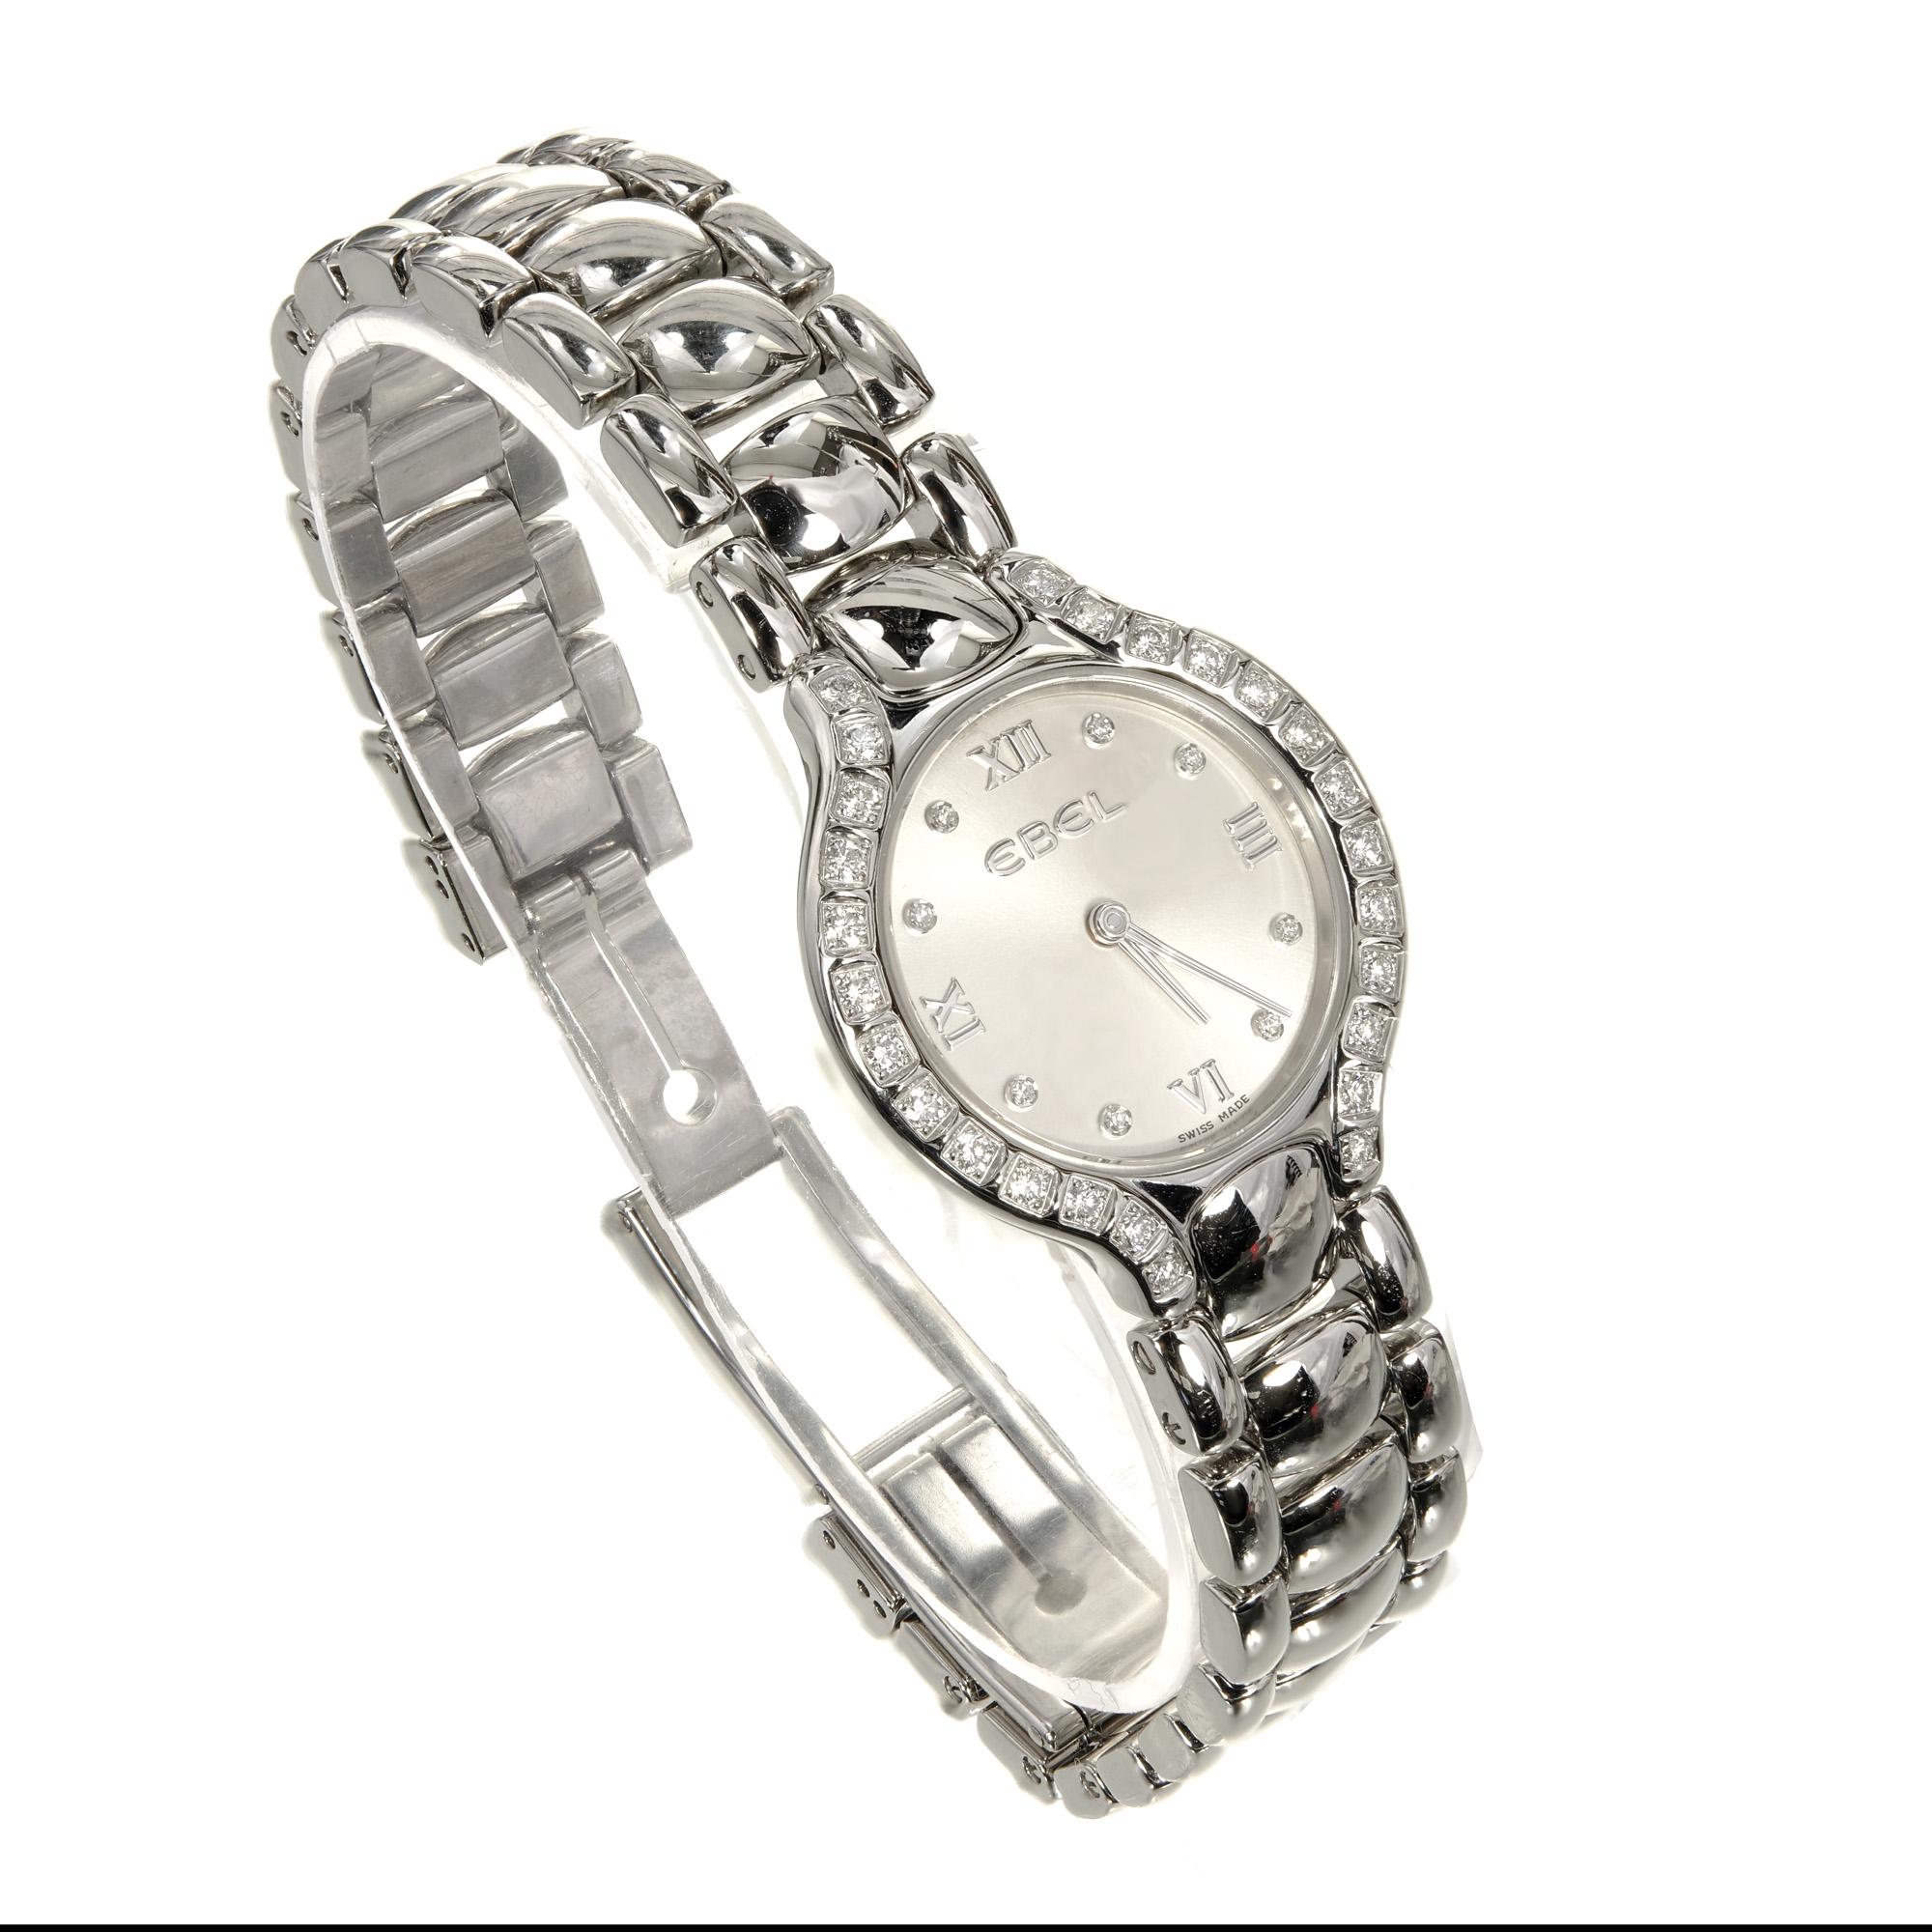 Ebel Beluga diamond bezel dial ladies wristwatch in stainless steel.

28 round diamonds approx total weight: .50cts SI-HI
8 round diamonds approx total weight: .02cts SI-HI
6 5/8 Inches long 
Length: 34mm
Width: 25mm
Band Width at Case: 12mm
Case